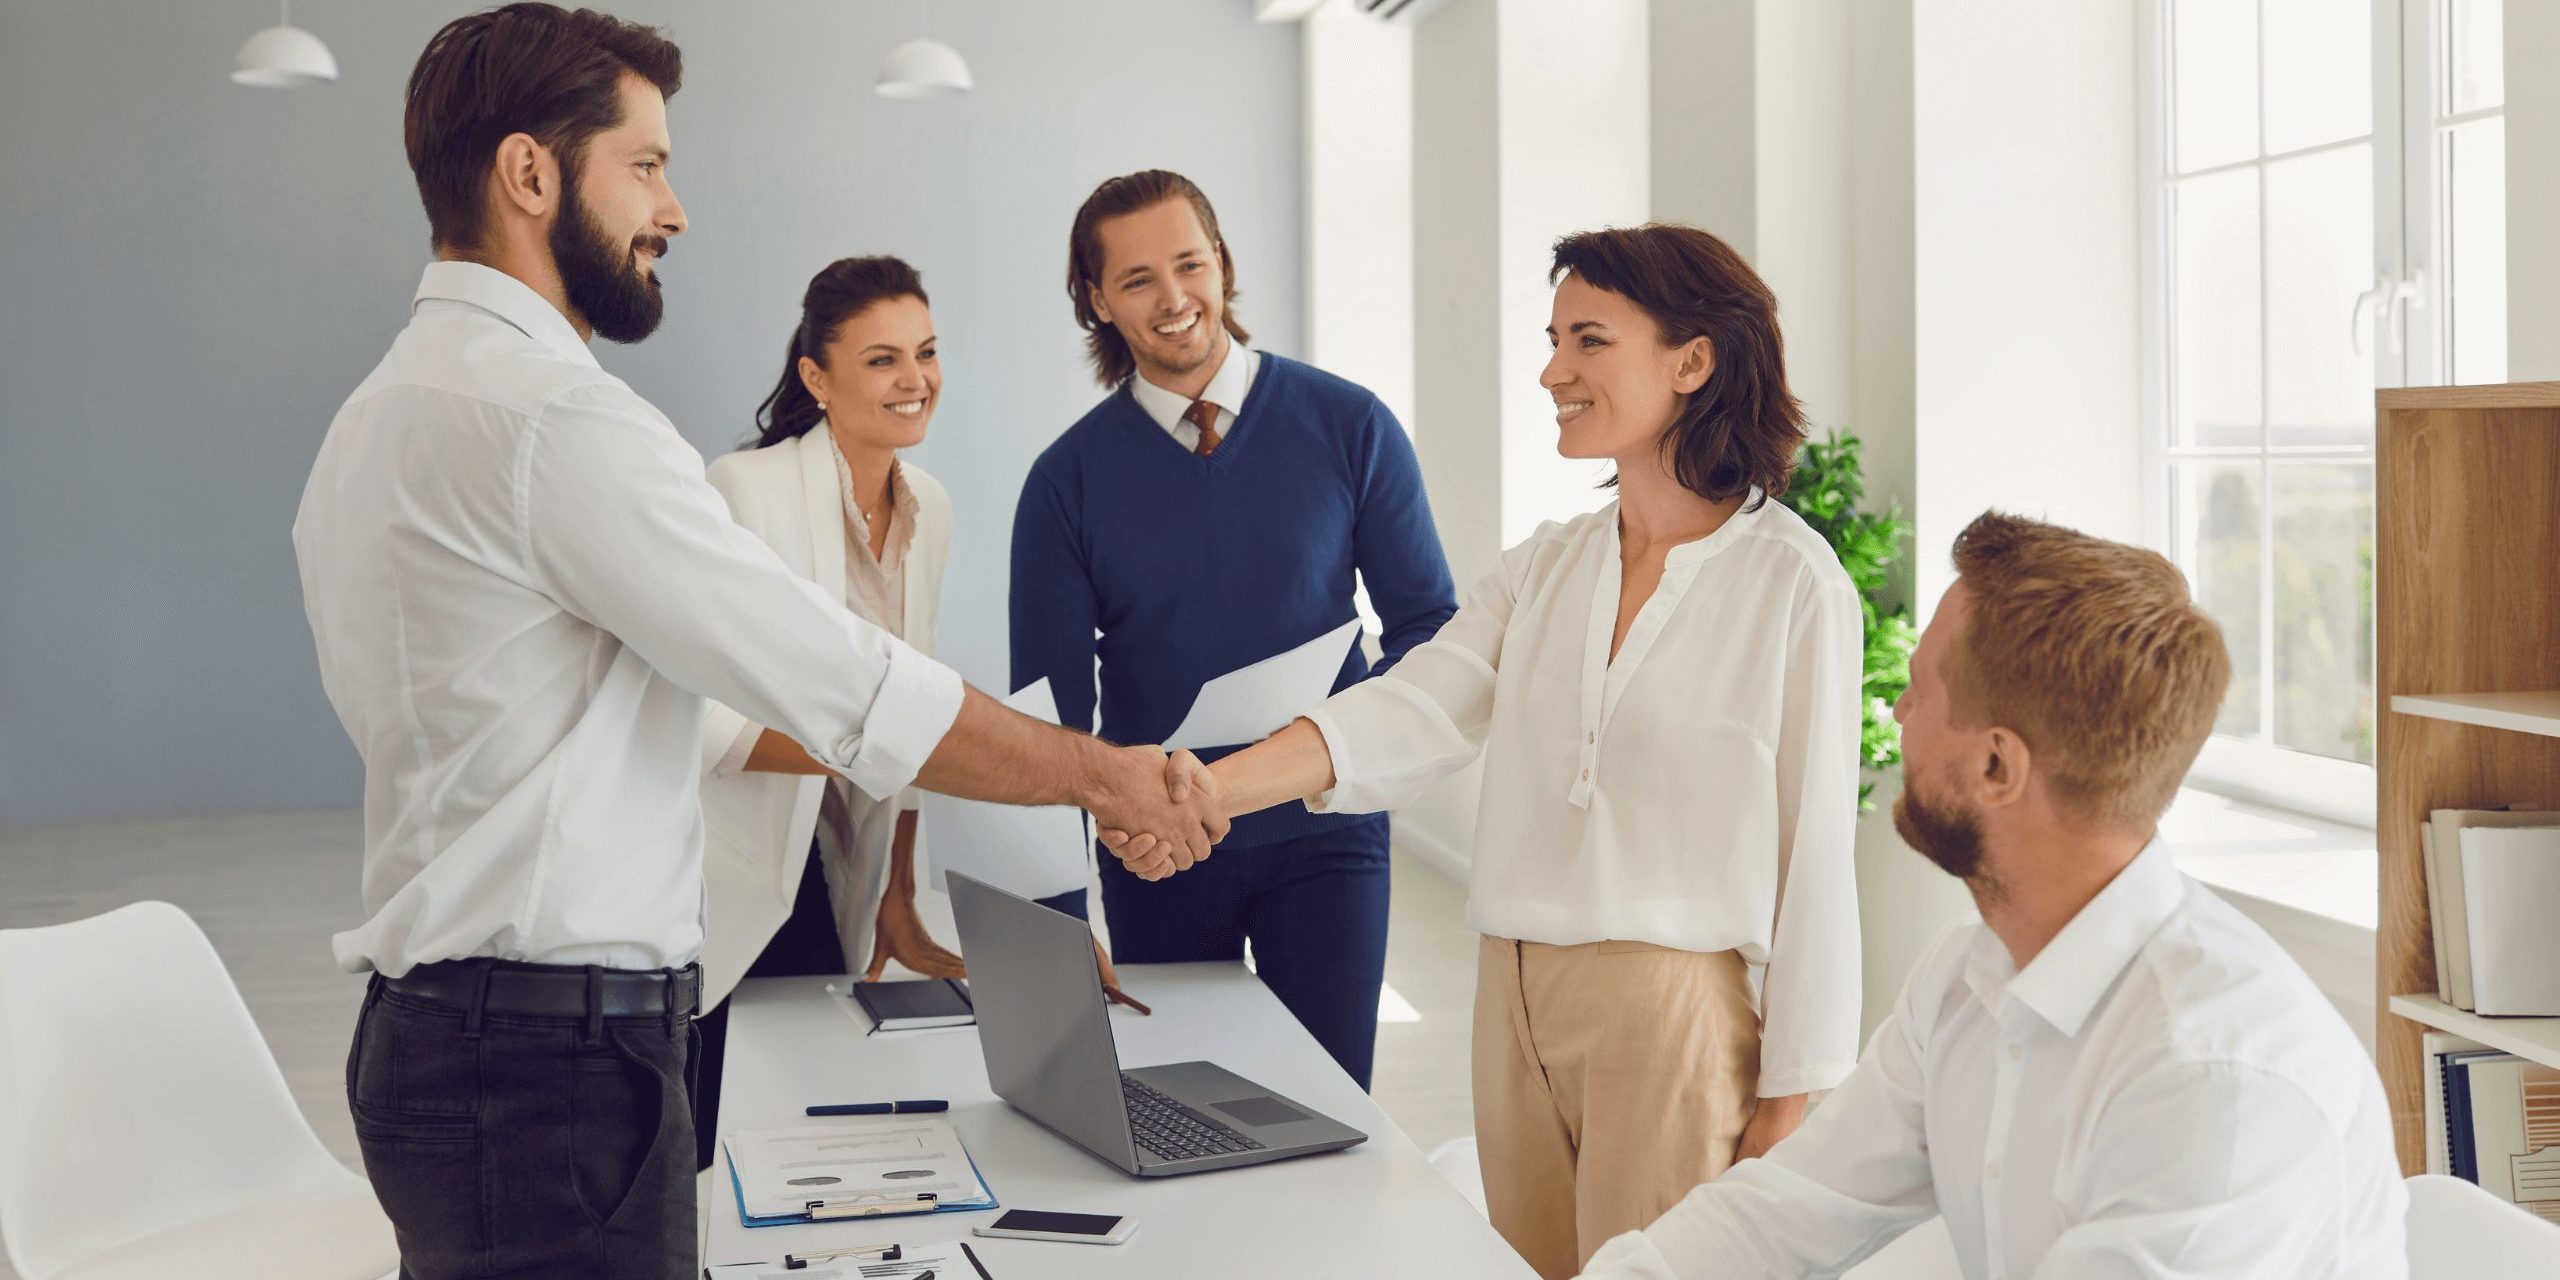 Business people shaking hands confirming a business deal in a negotiation meeting